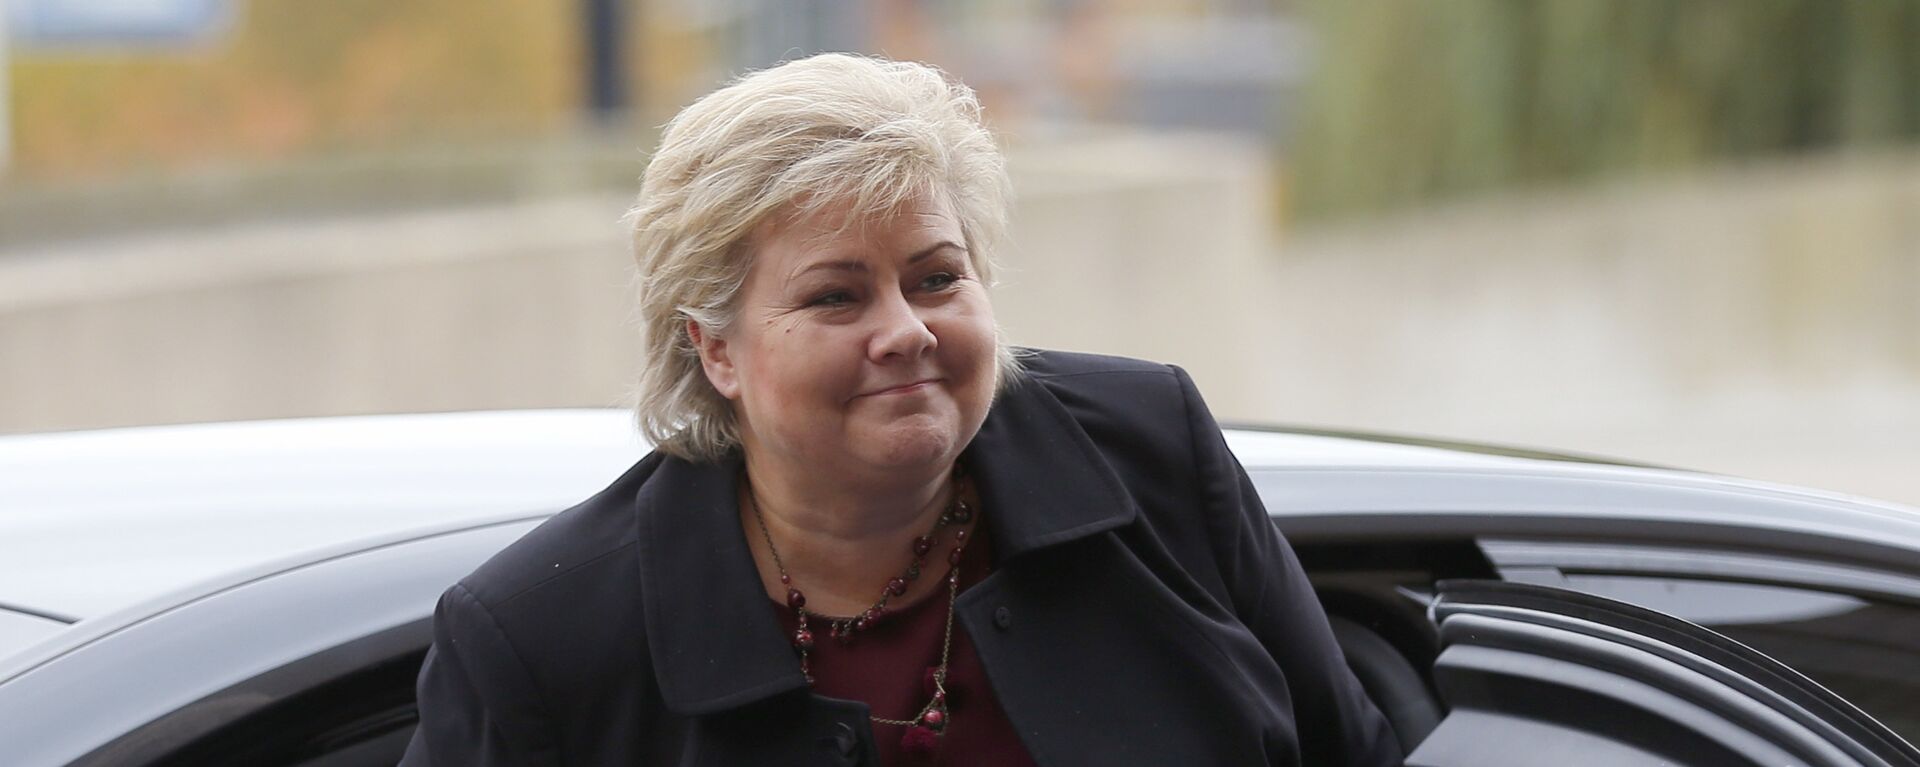 Norway's Prime Minister Erna Solberg arrives for a meeting of the European People's Party in Maastricht, southern Netherlands, Thursday, Oct. 20, 2016. - Sputnik International, 1920, 19.03.2021